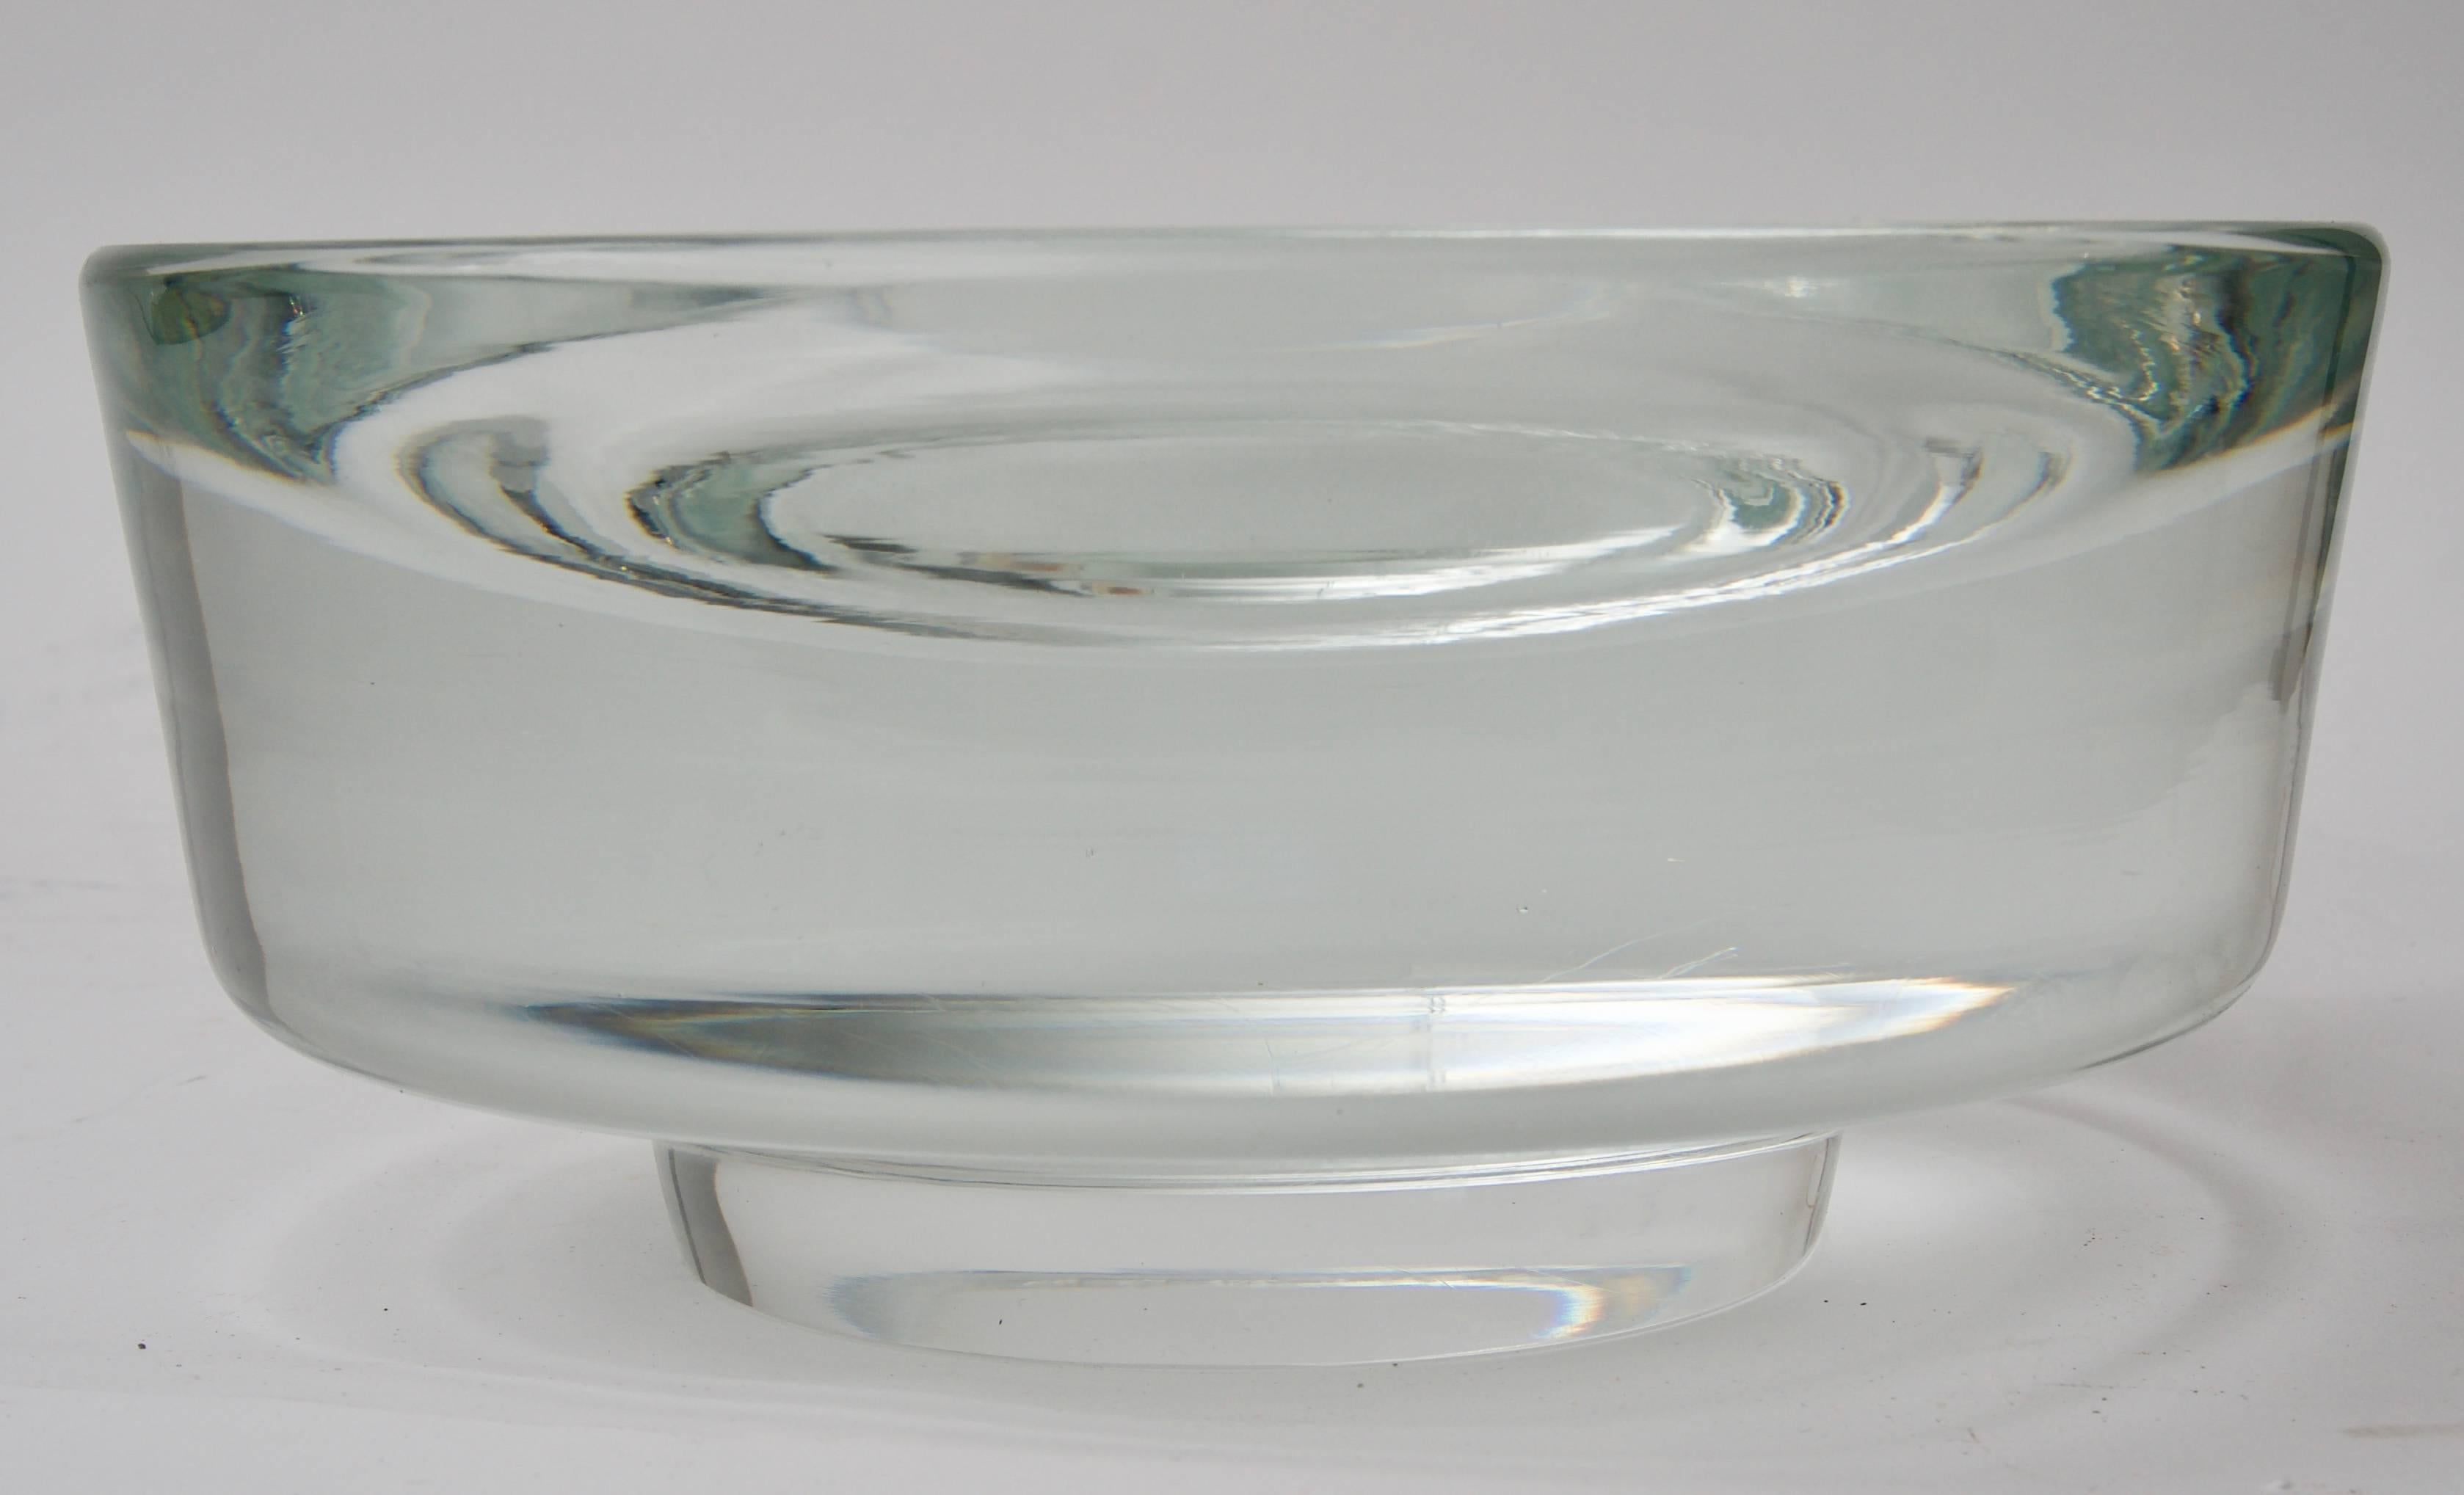 This stylish and chic and coveted piece of Venini Murano glass dish was designed by the iconic American designer Karl Springer.

Note: See image #6 for signature Karl Springer on the underside of dish.